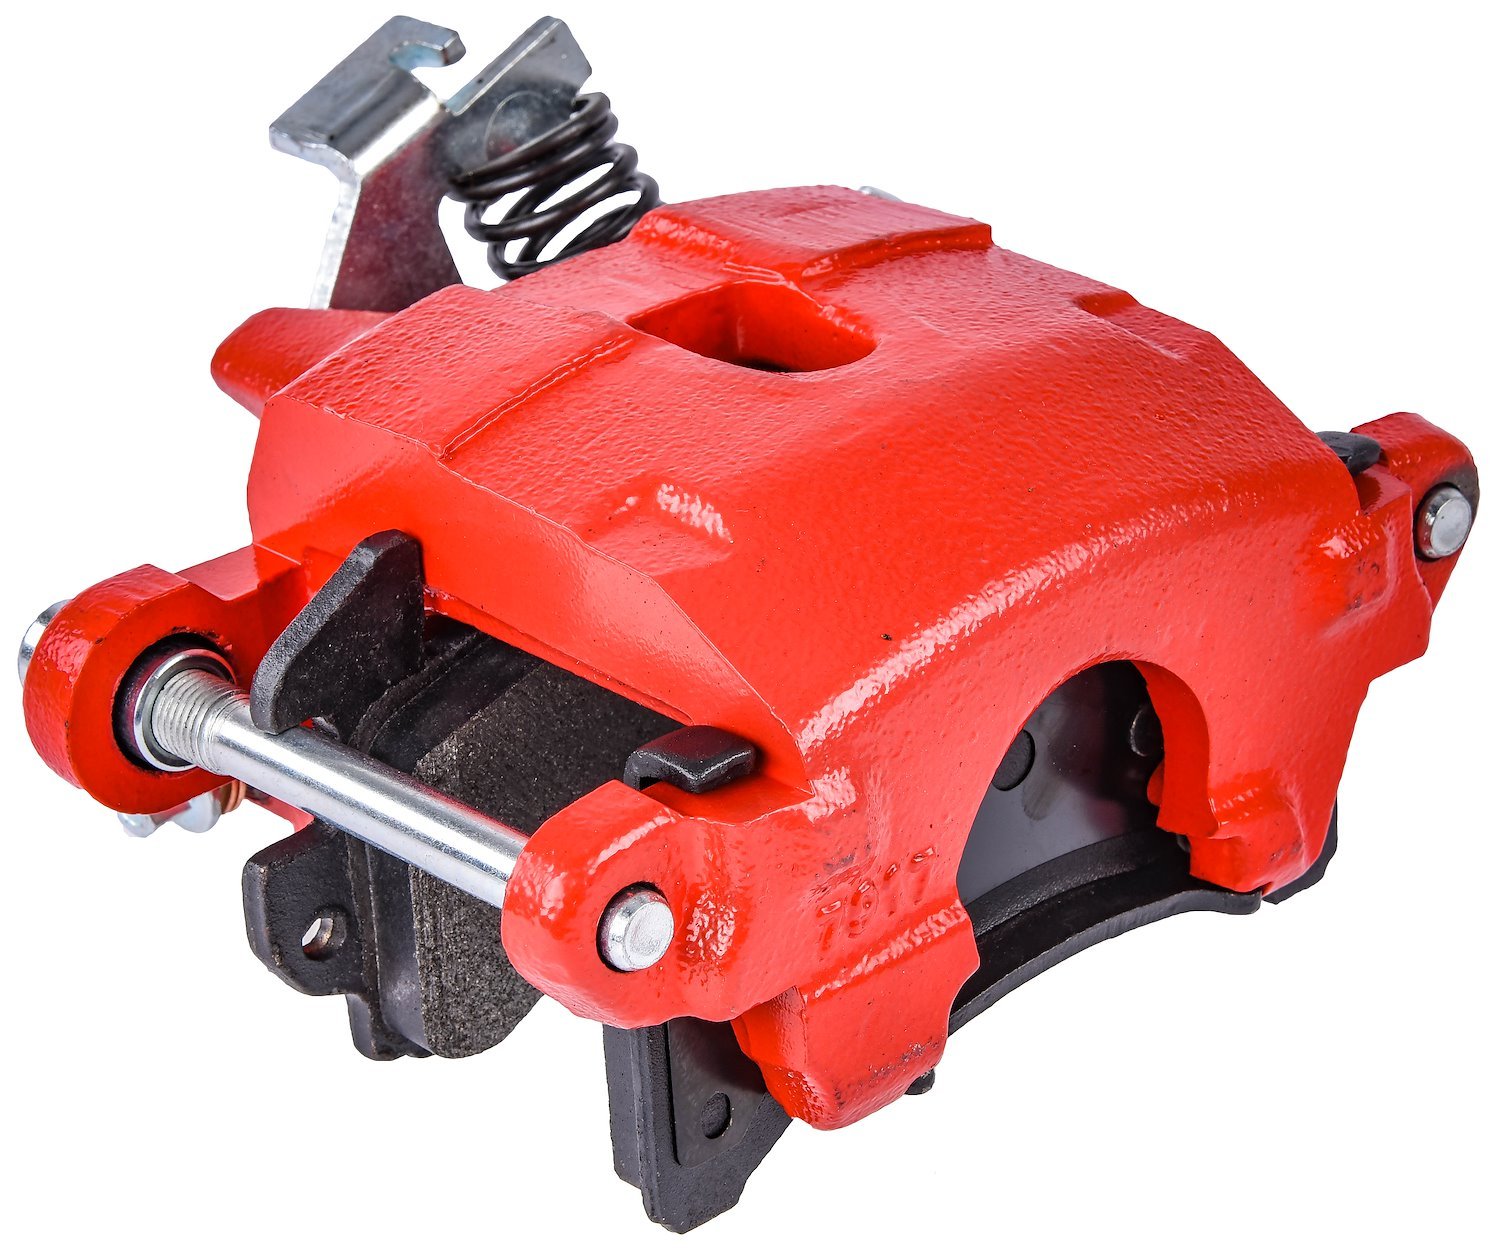 GM Rear Disc Brake Caliper with D154 Pads & E-Brake Mechanism, Right/Passenger Side, Red Powder Coated [NEW]